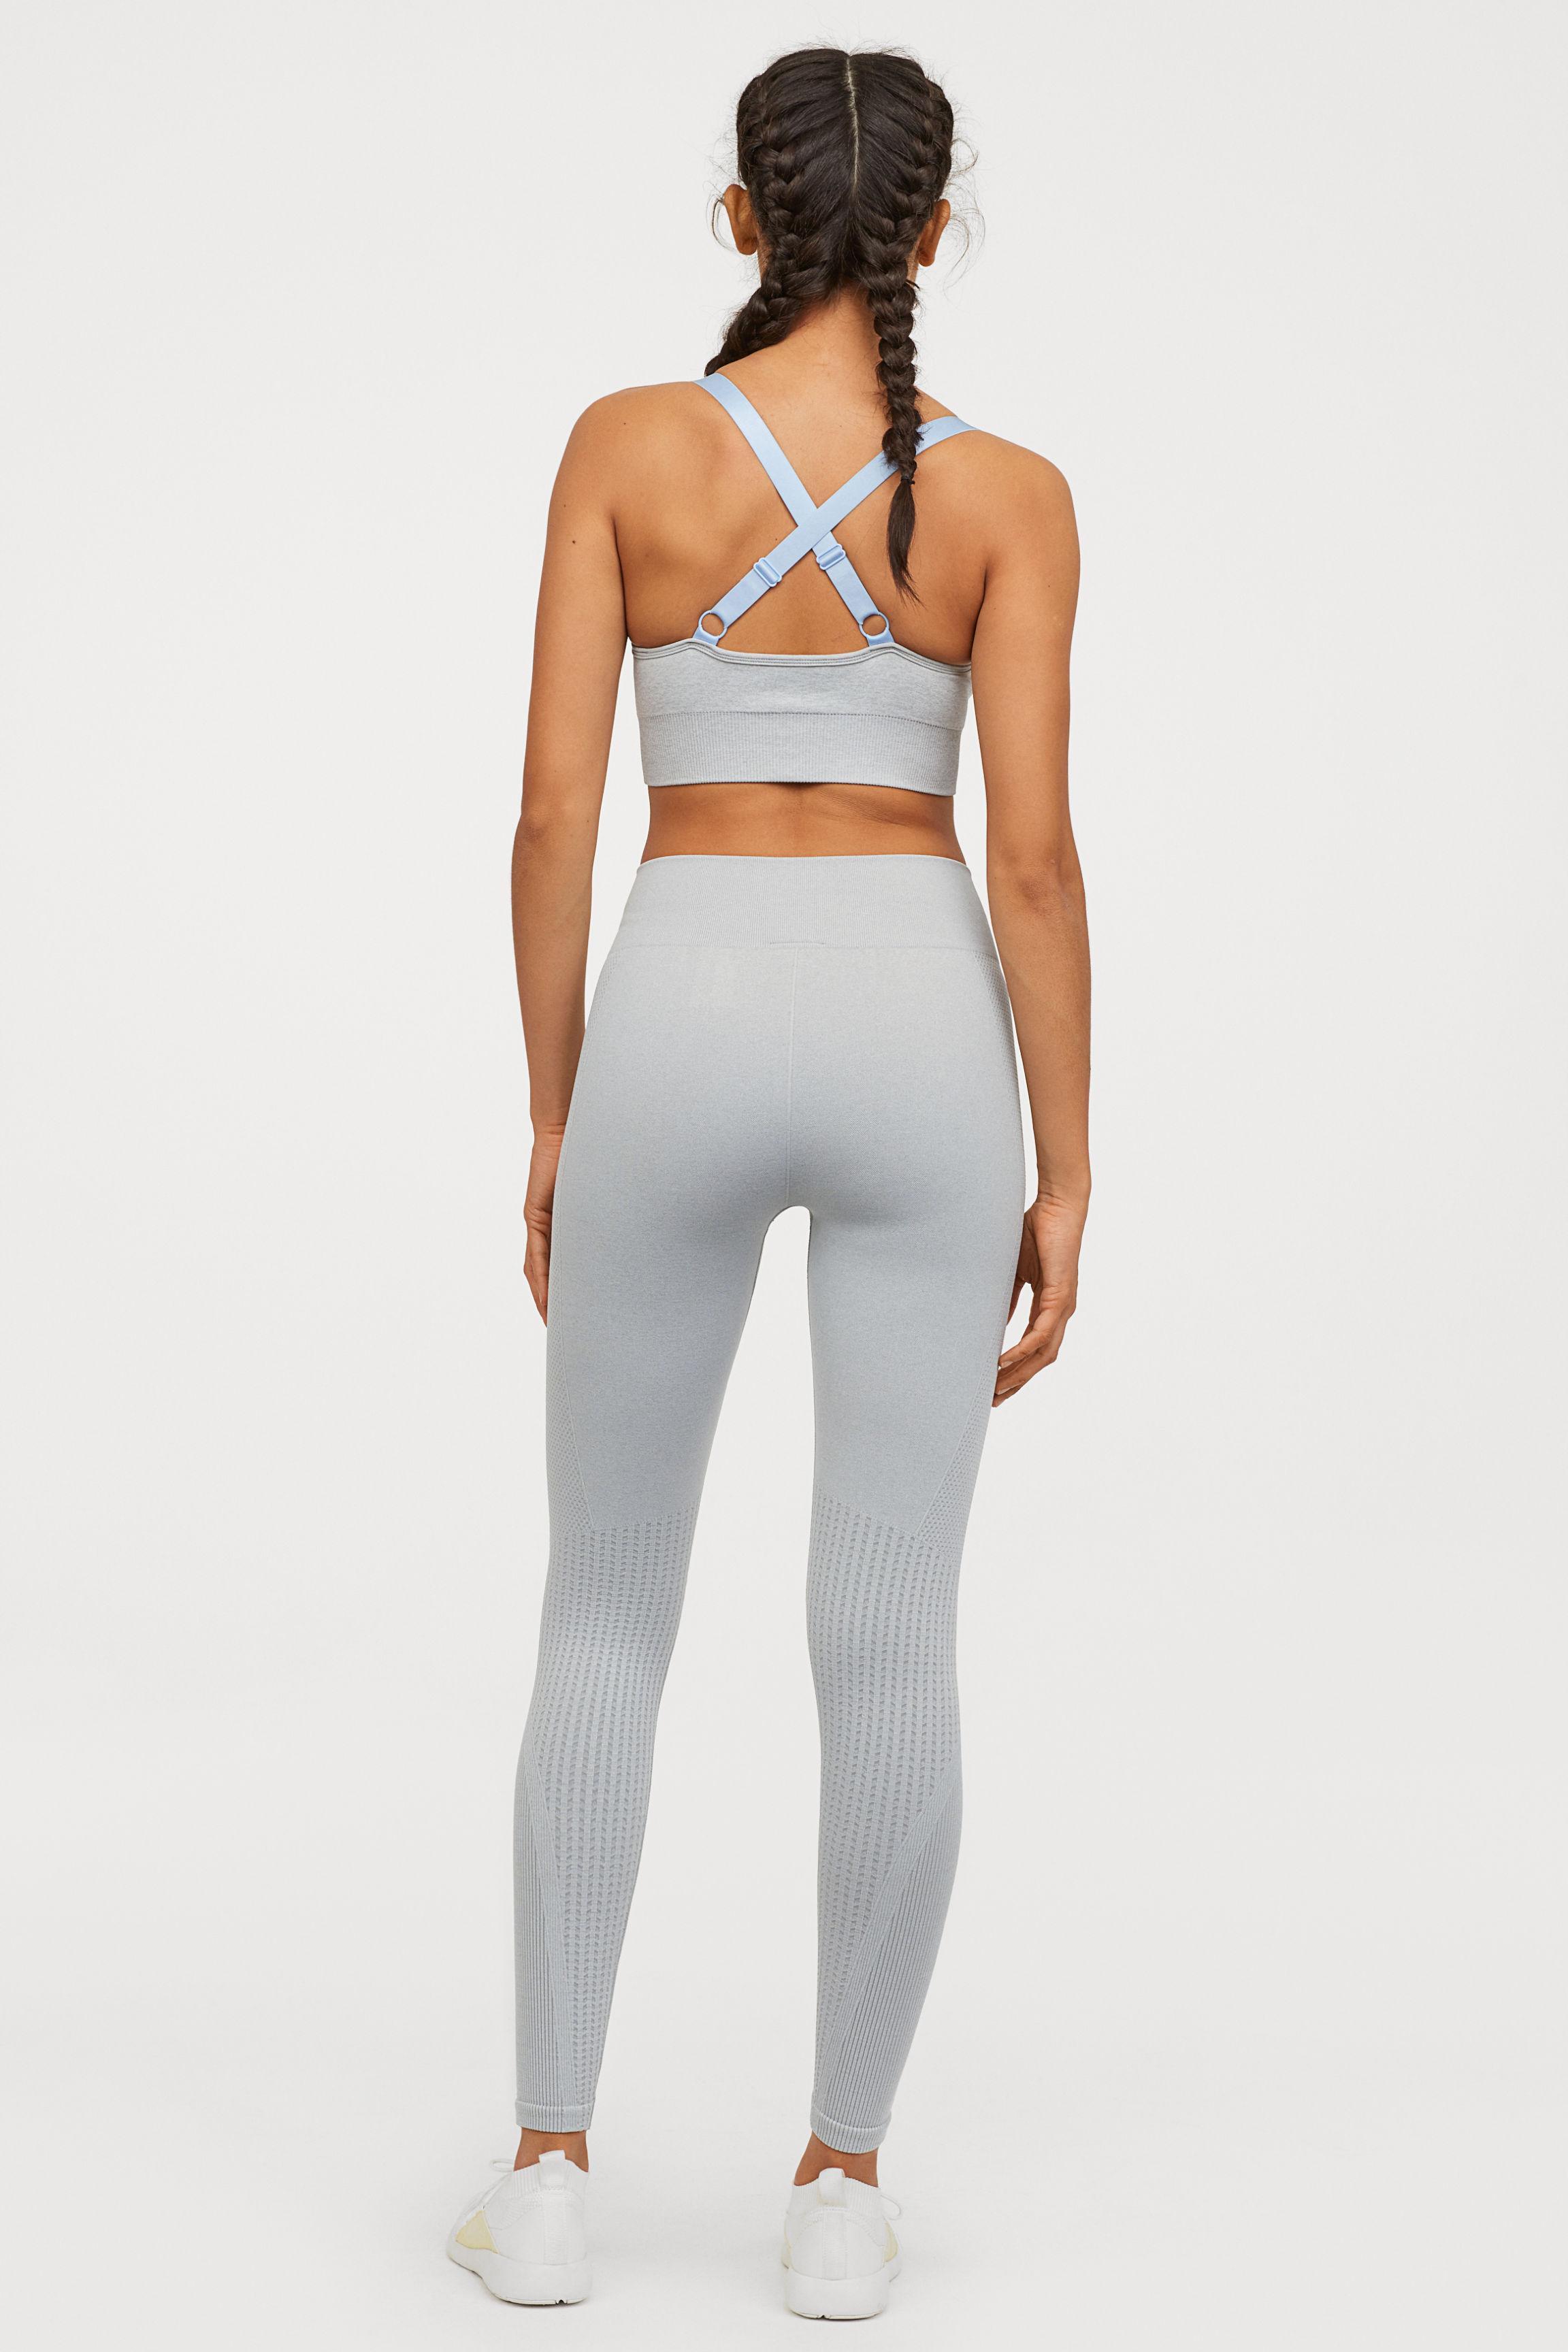 H&m Athletic Leggings Women's  International Society of Precision  Agriculture